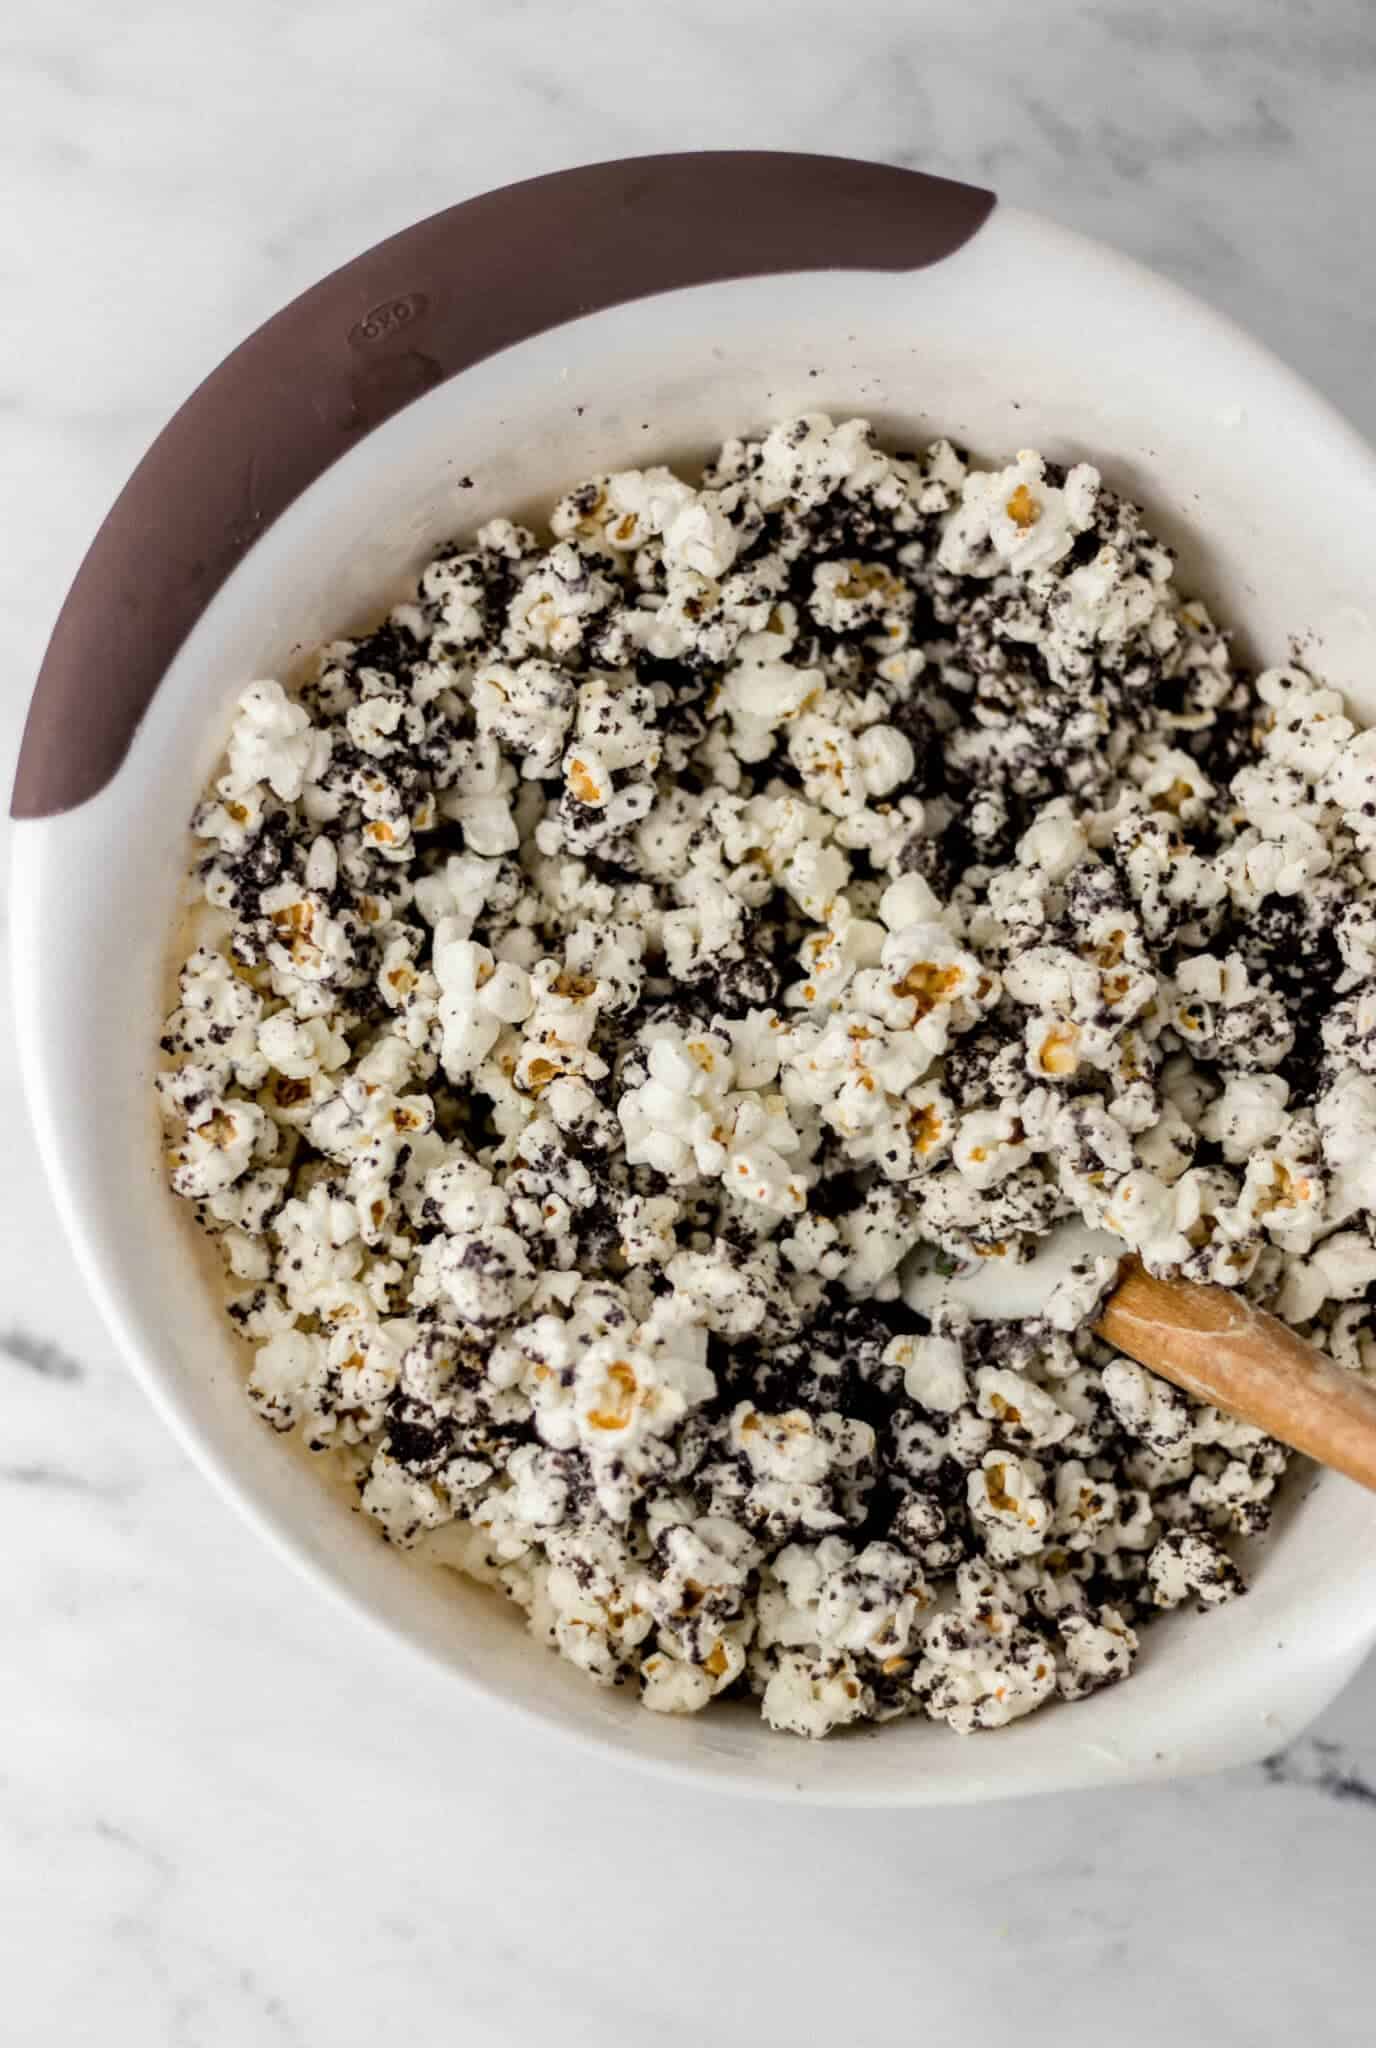 crushed cookies and melted chocolate added to popcorn in large white bowl with spatula